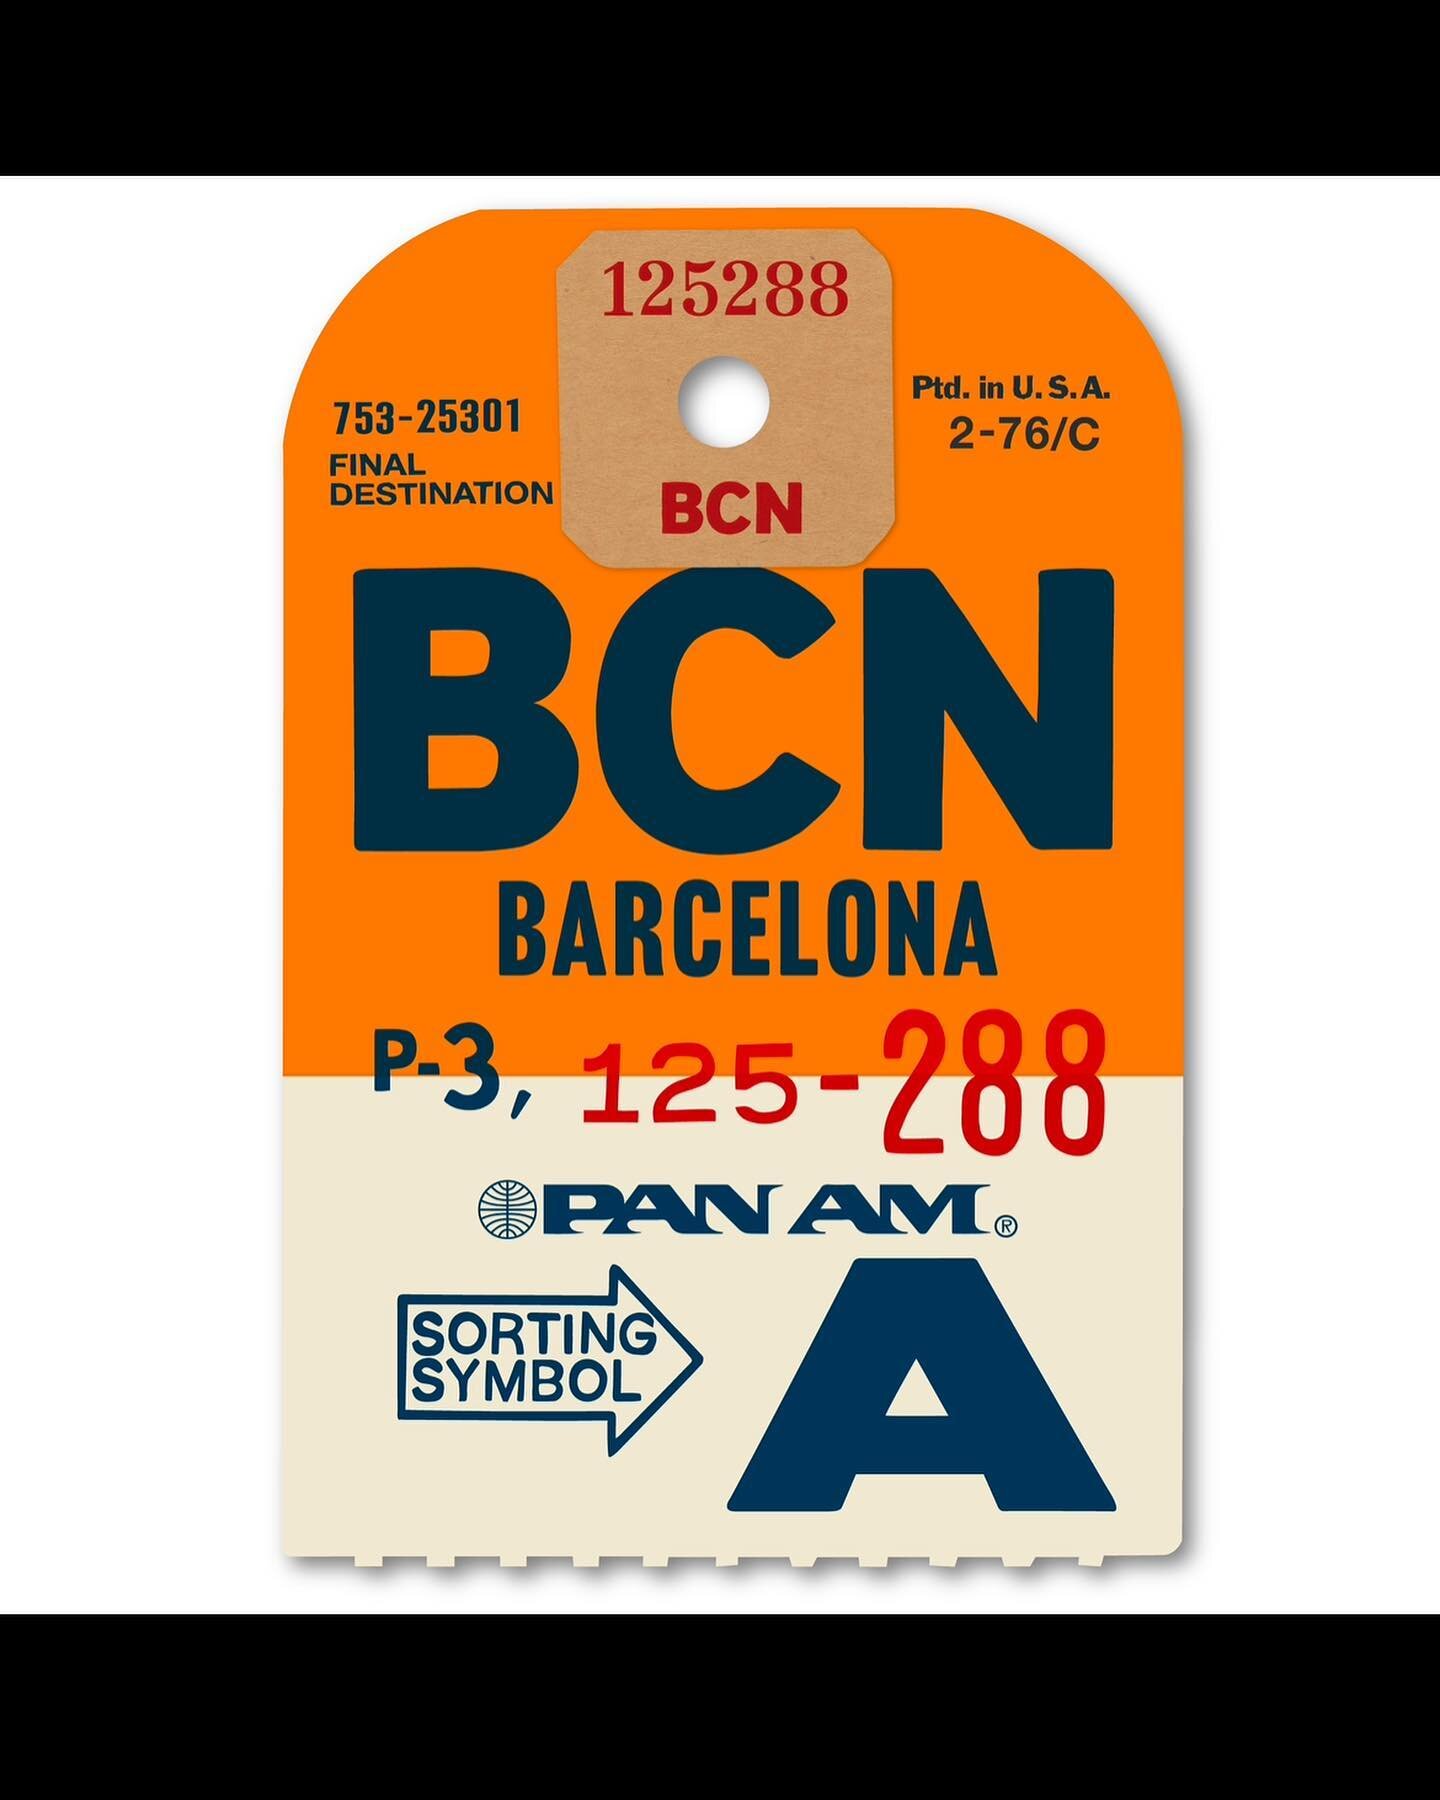 London is as hot as Barcelona and most of Europe and  beyond! 
@ella_freire will be landing with Pan Am &ldquo;Barcelona&rdquo;luggage tag in 48hrs at &ldquo; Spectrum&rdquo; I will be showing this limited edition print at our group show @jmgallerylo